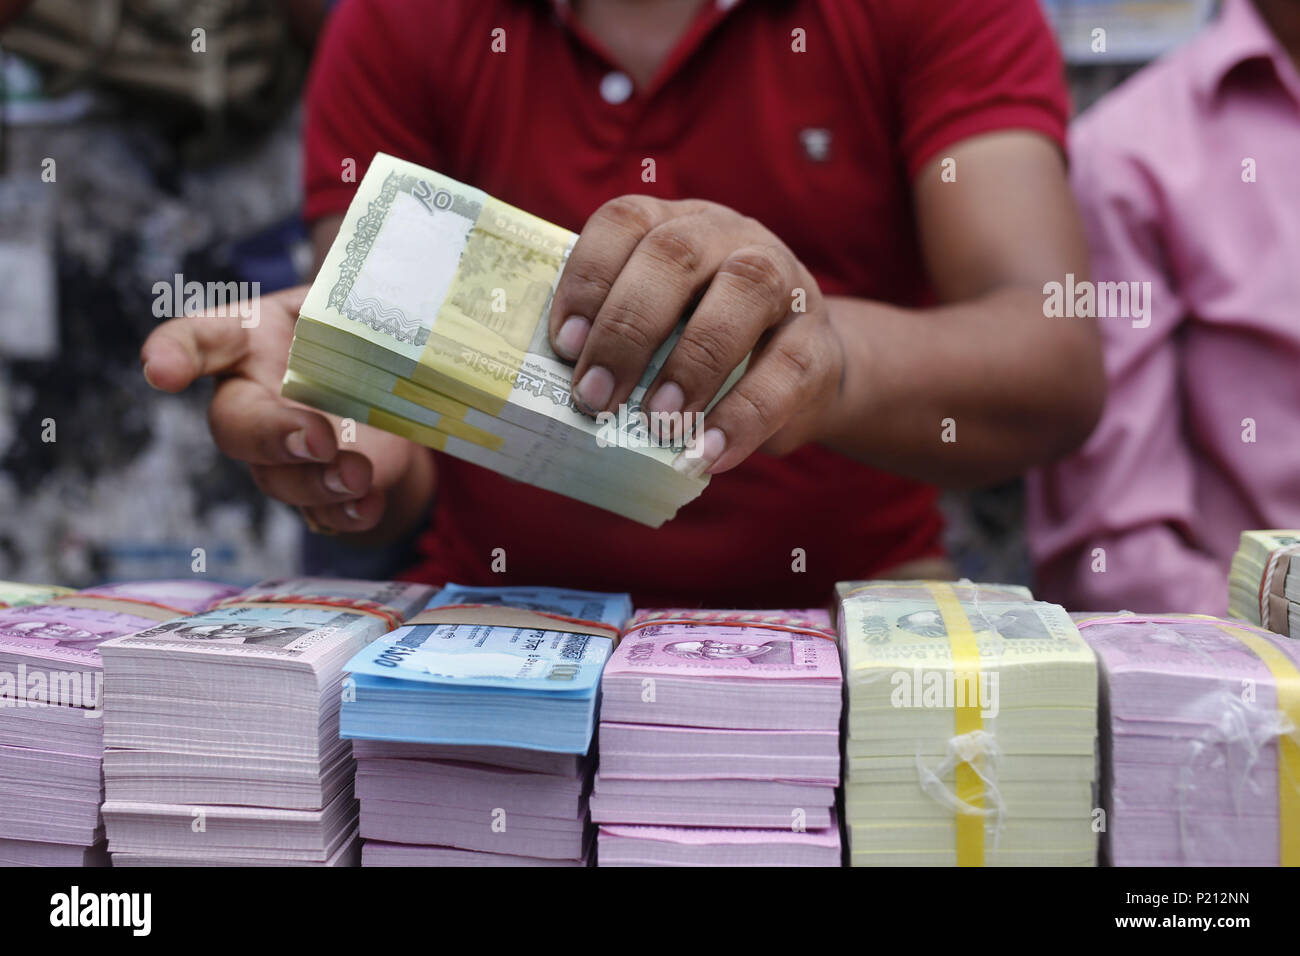 Dhaka, Bangladesh. 13th June, 2018. Street vendors display fresh bank notes for sale as exchange for a rate of an addition ahead of Eid. Fresh notes demand increase for eid festival as people give for salami (an auspicious token) in Gulistan Avenue. Credit: Md. Mehedi Hasan/ZUMA Wire/Alamy Live News Stock Photo